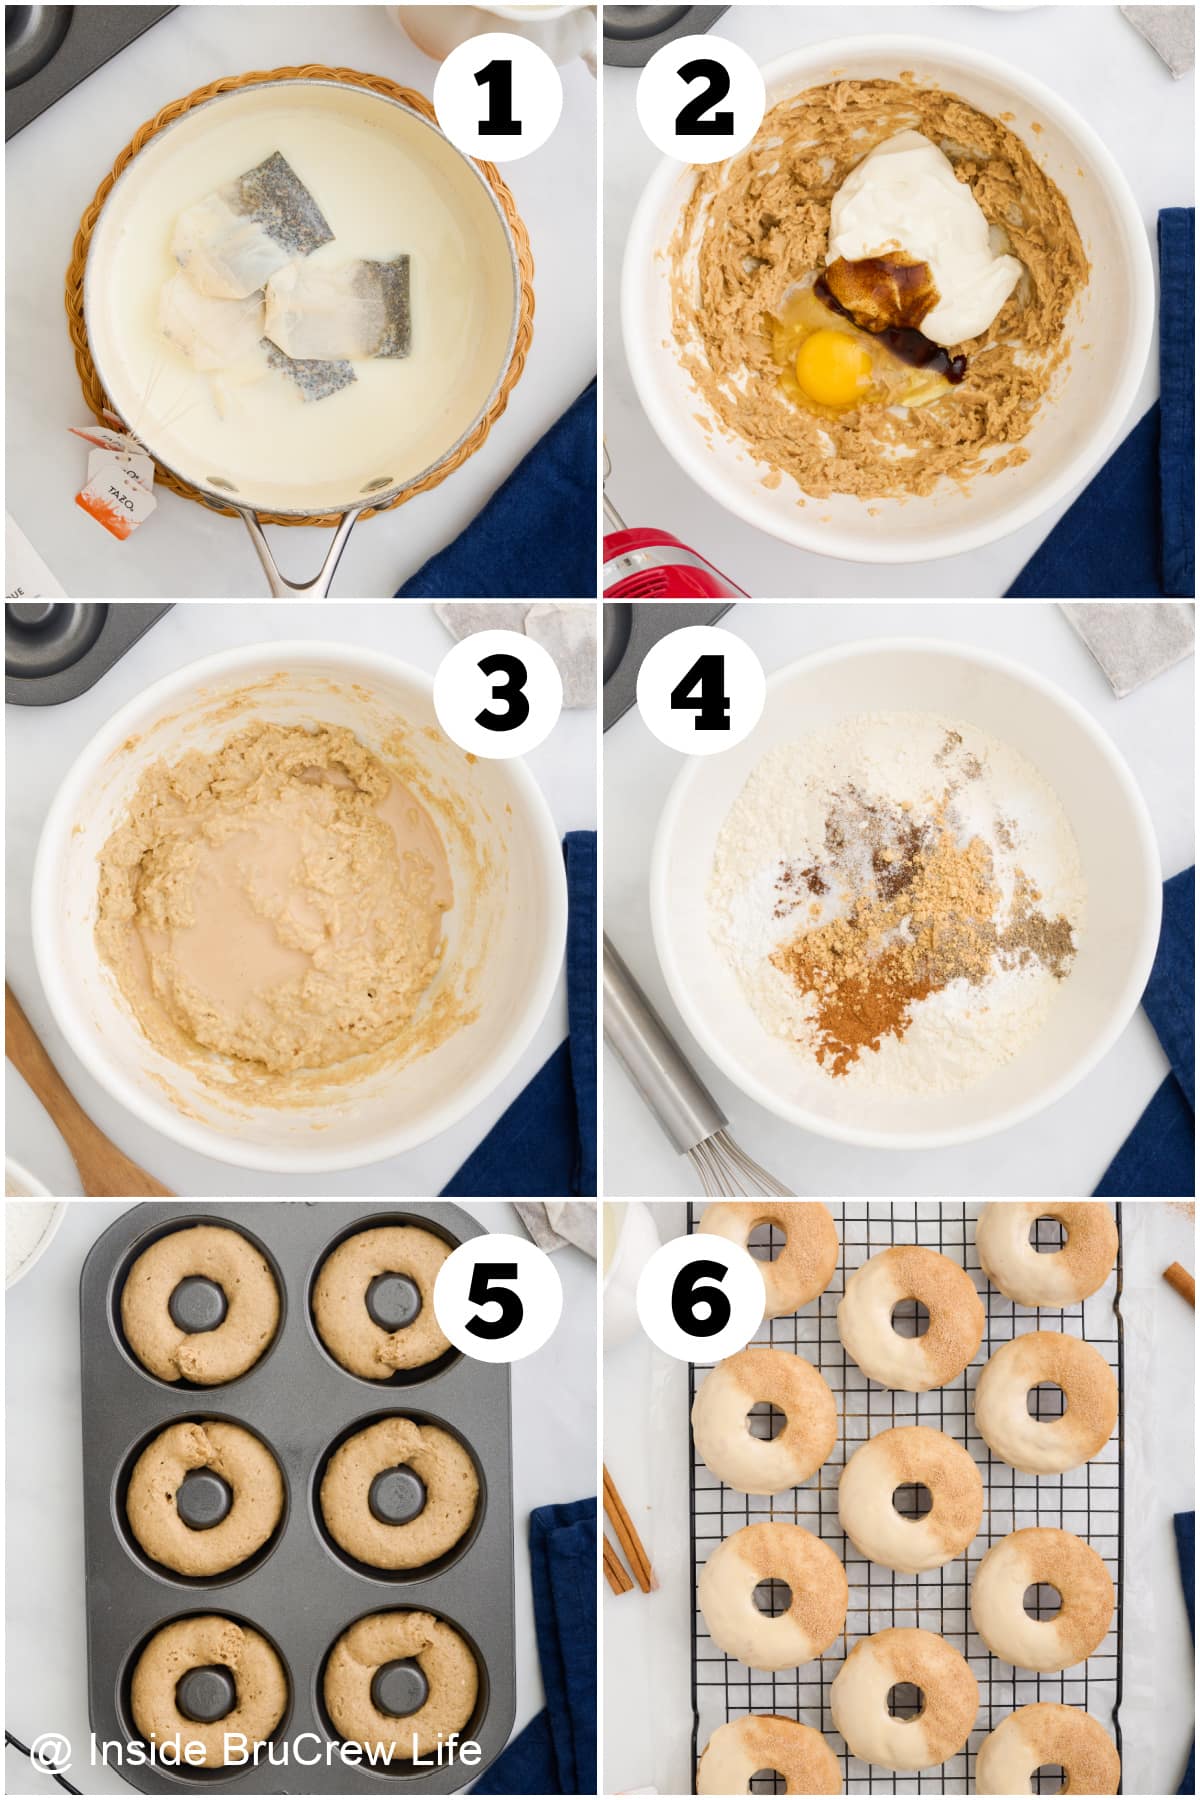 Six pictures collaged together showing how to make and glaze homemade donuts.